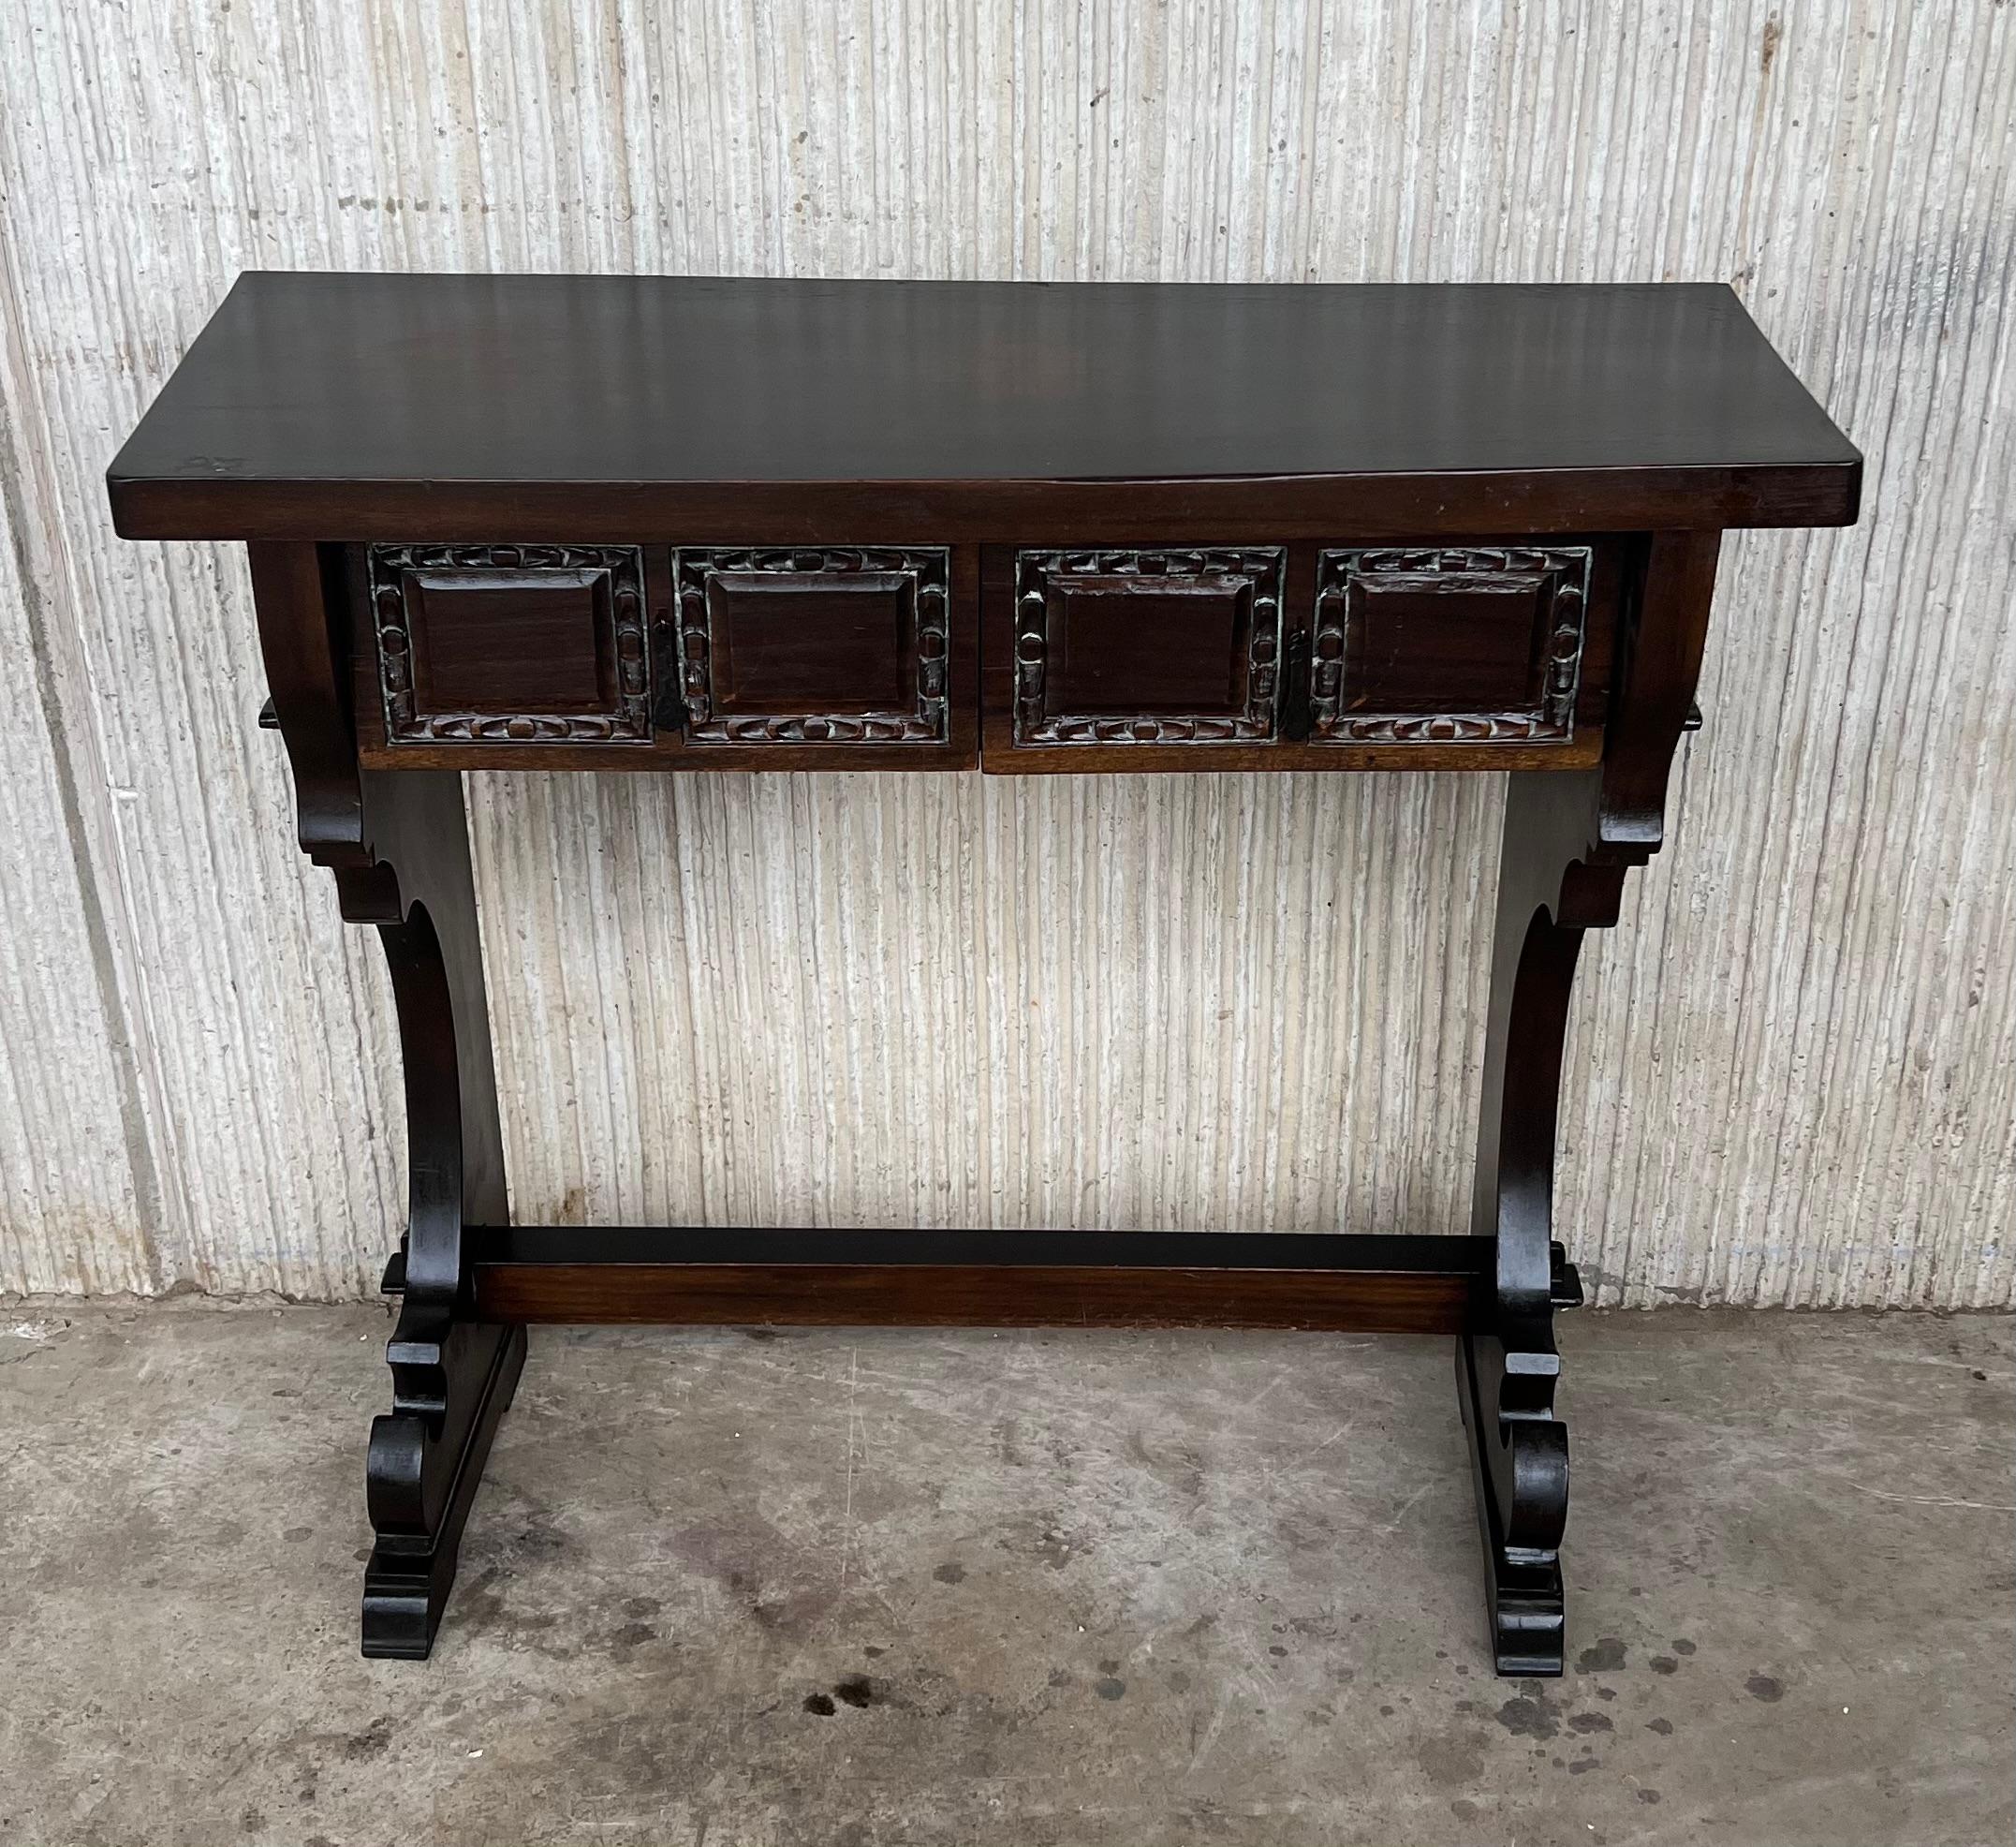 Spanish colonial narrow console table with two carved drawers
This piece has a two-pedestal legs with an awesome carved. 

We have a matching piece you can see in the last picture.
 